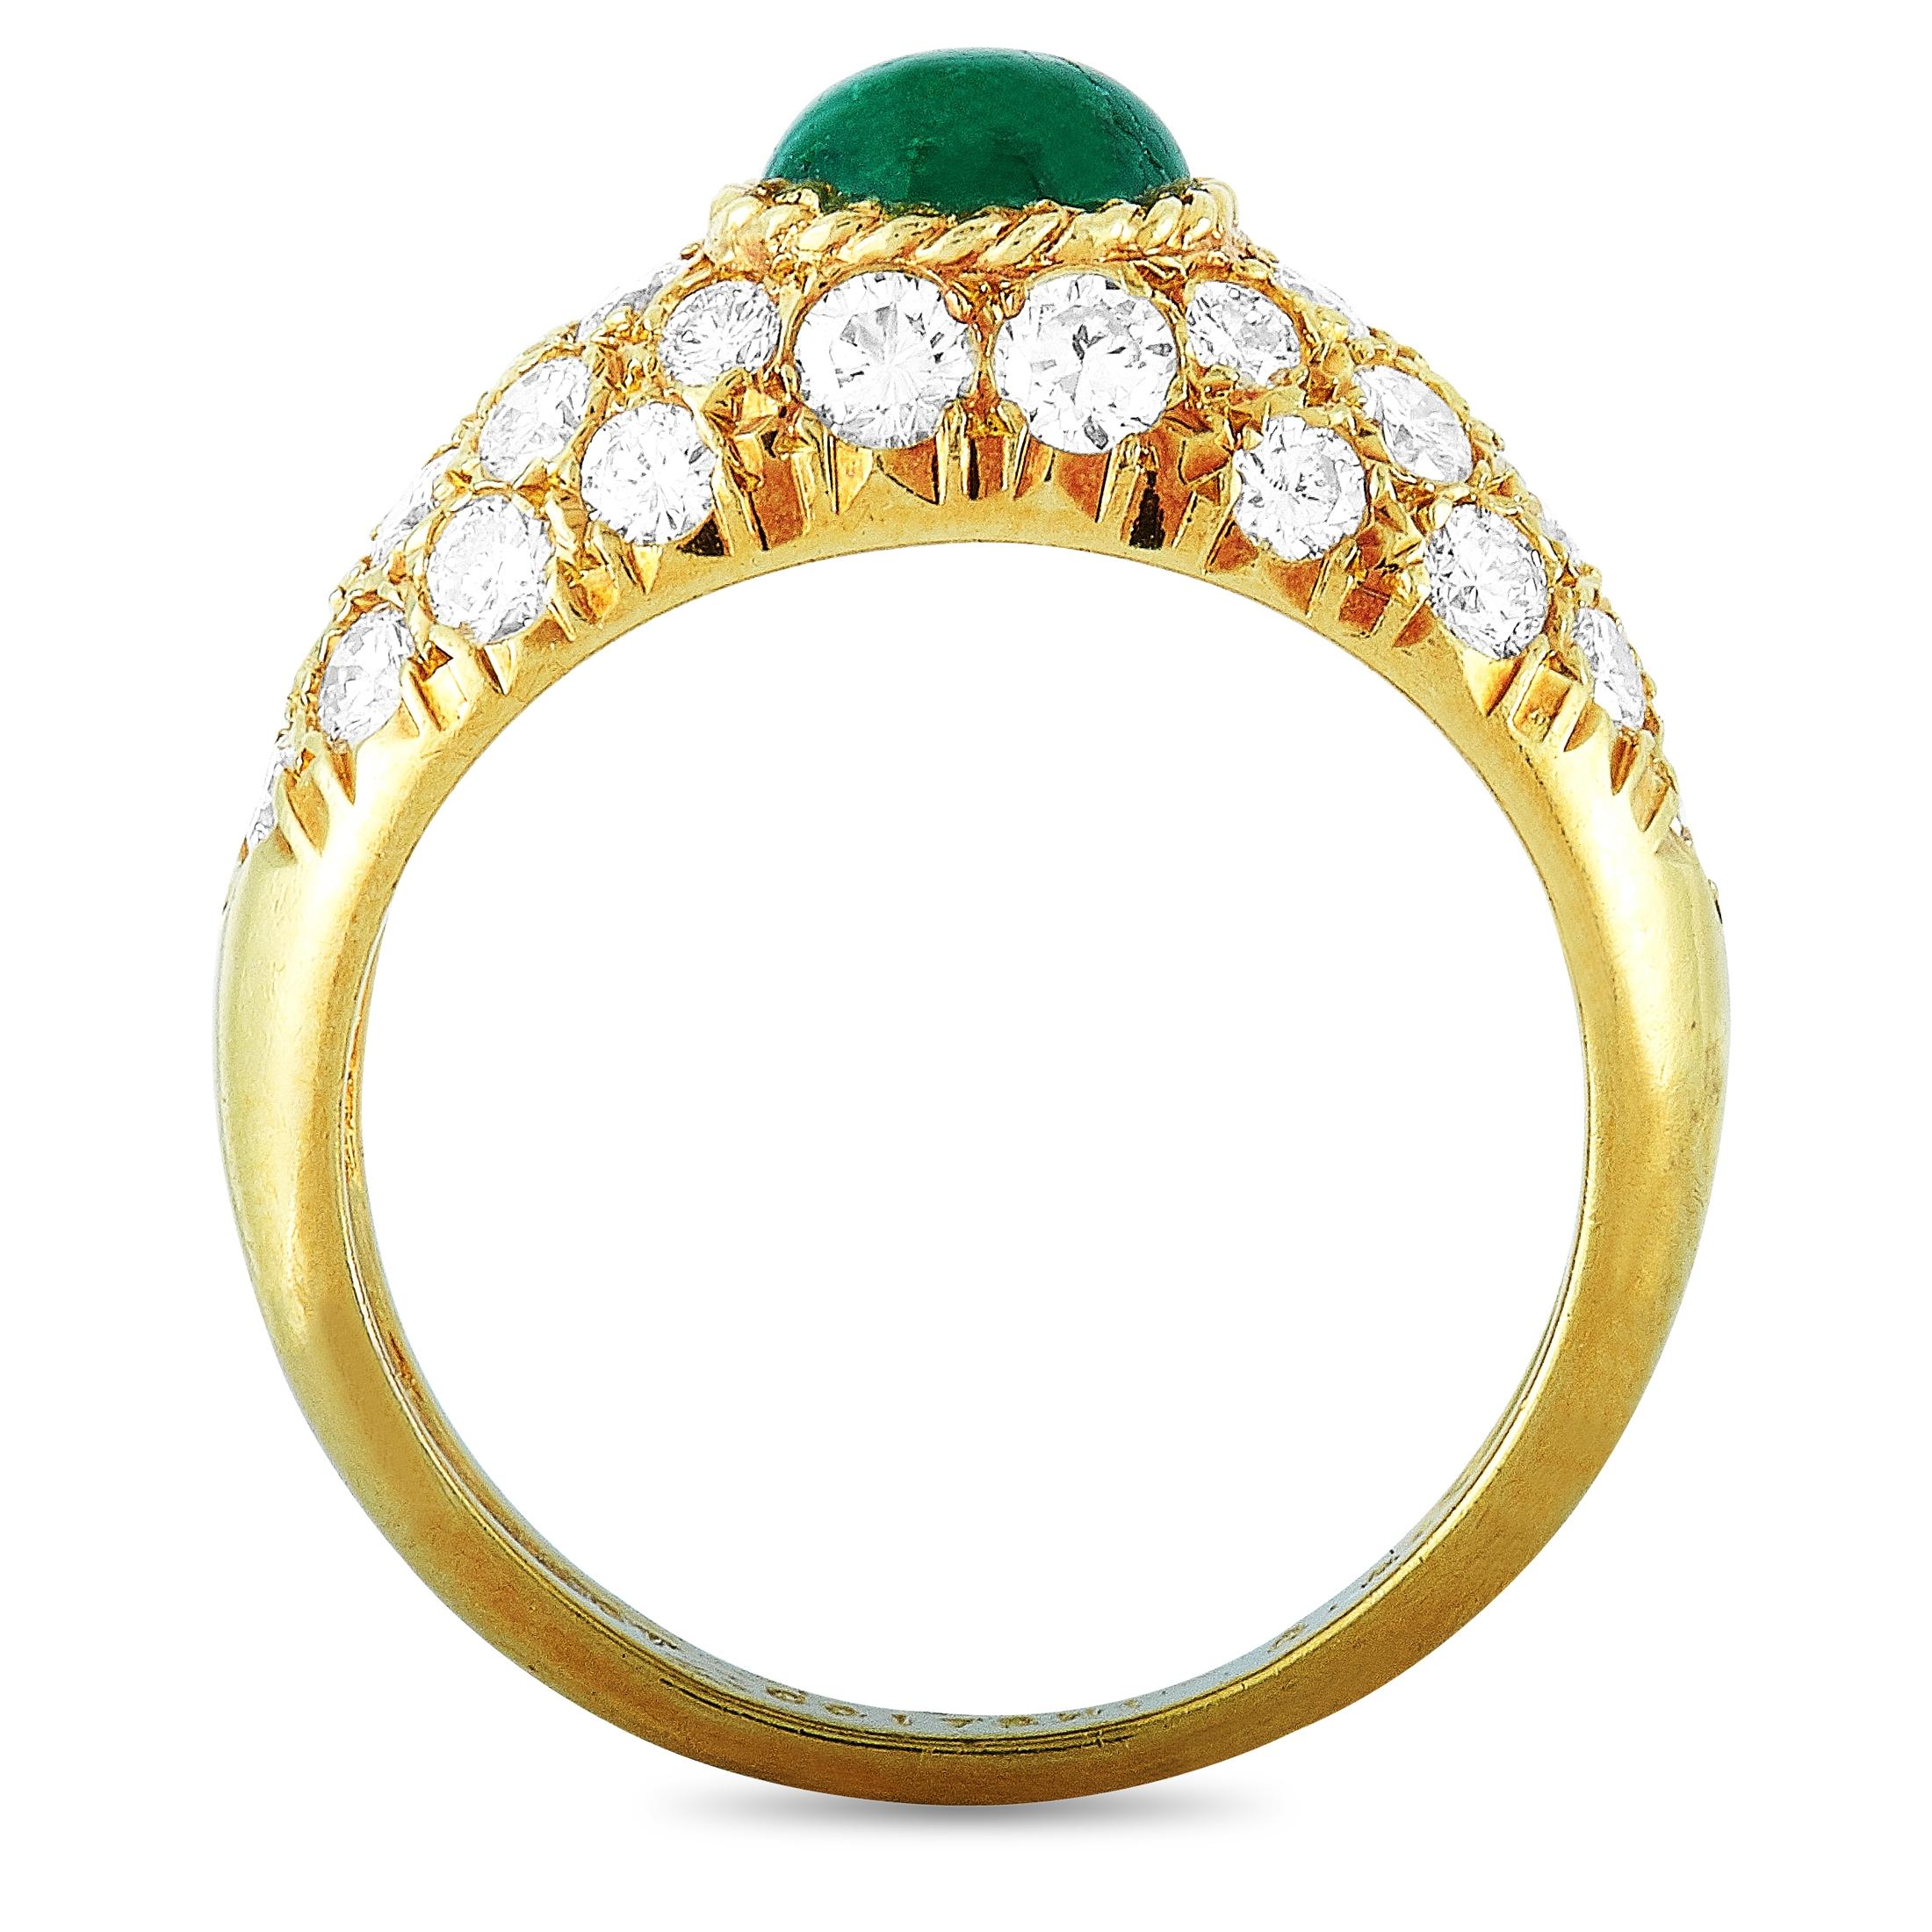 This vintage Van Cleef & Arpels ring is crafted from 18K yellow gold and weighs 4.2 grams, boasting band thickness of 2 mm and top height of 6 mm, while top dimensions measure 20 by 6 mm. The ring is set with an emerald and a total of 0.86 carats of